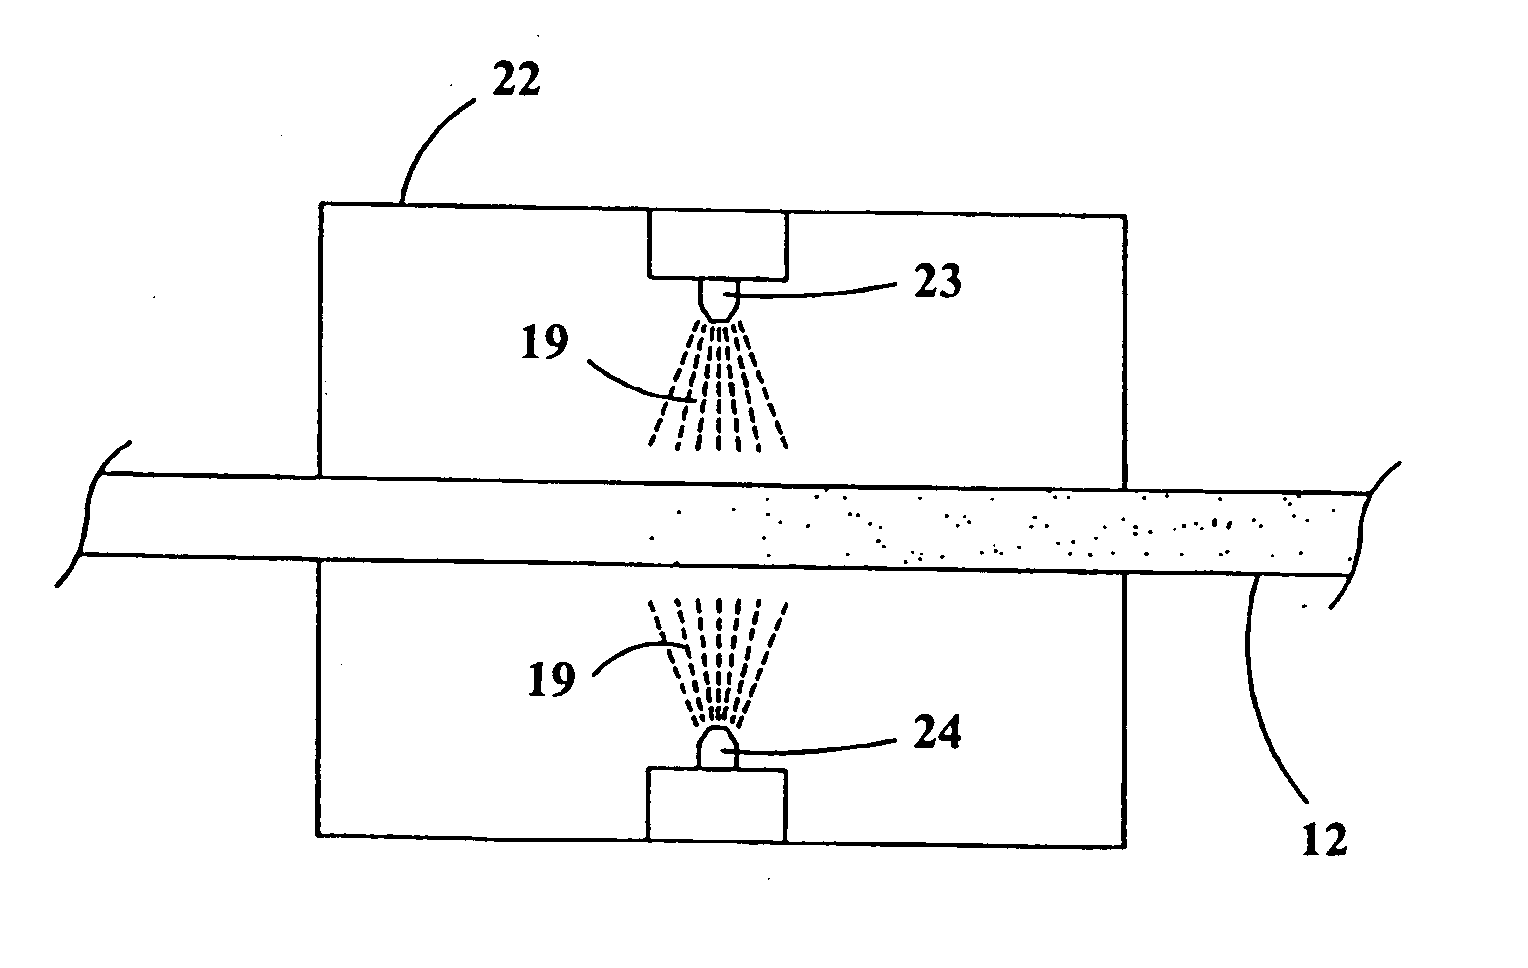 Electrical cable having a surface with reduced coefficient of friction